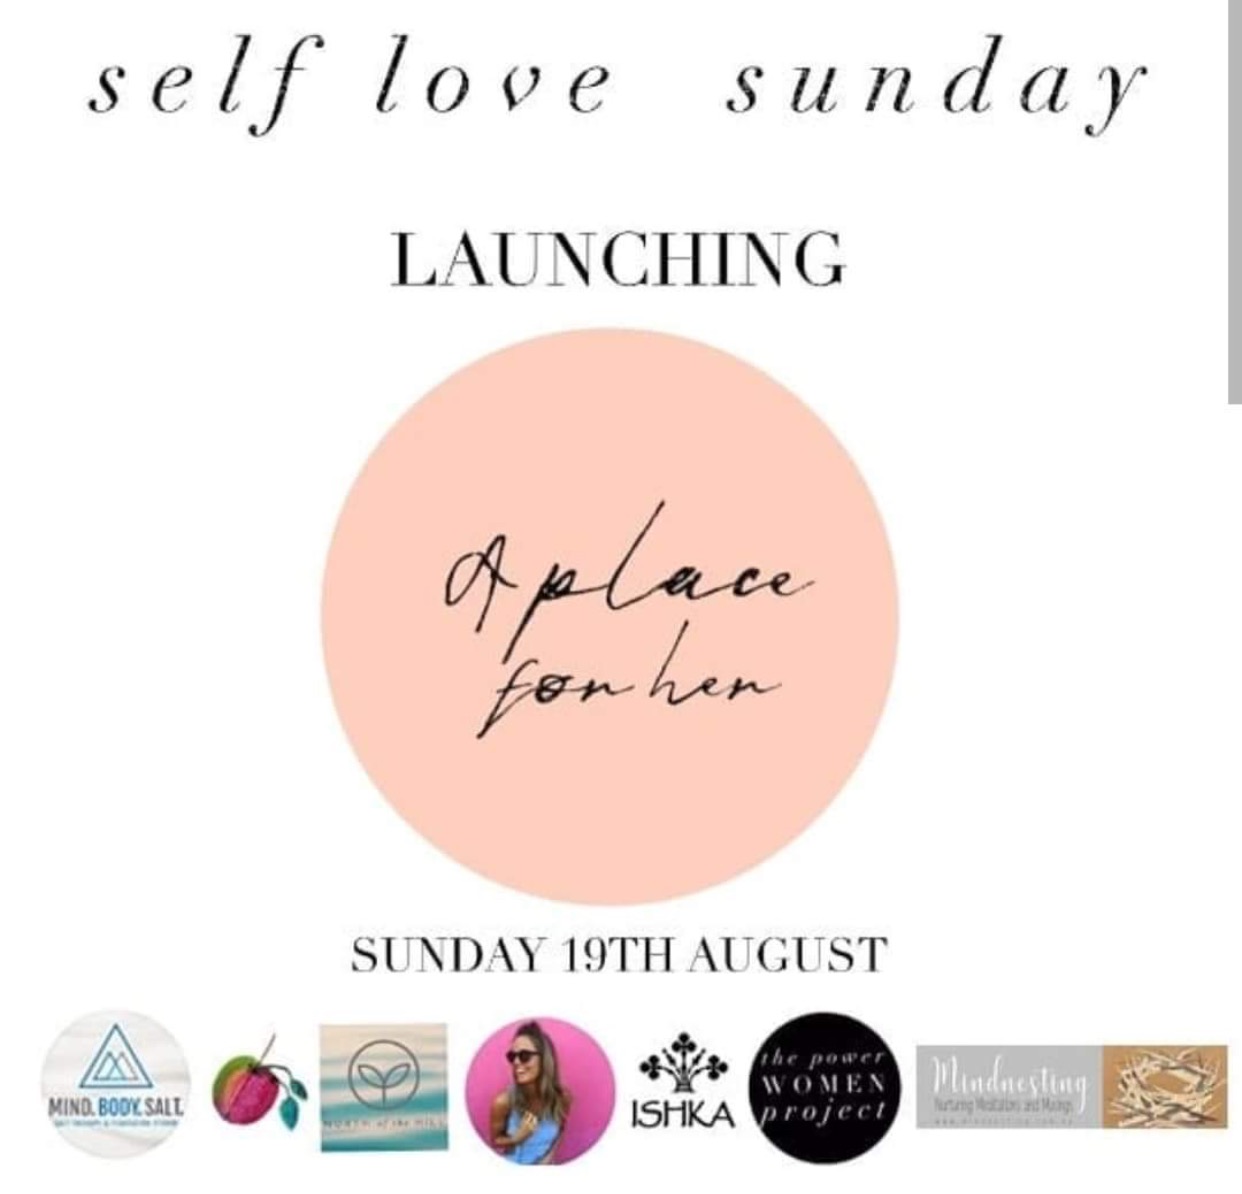 The Launch of @a_place_for_her is coming!